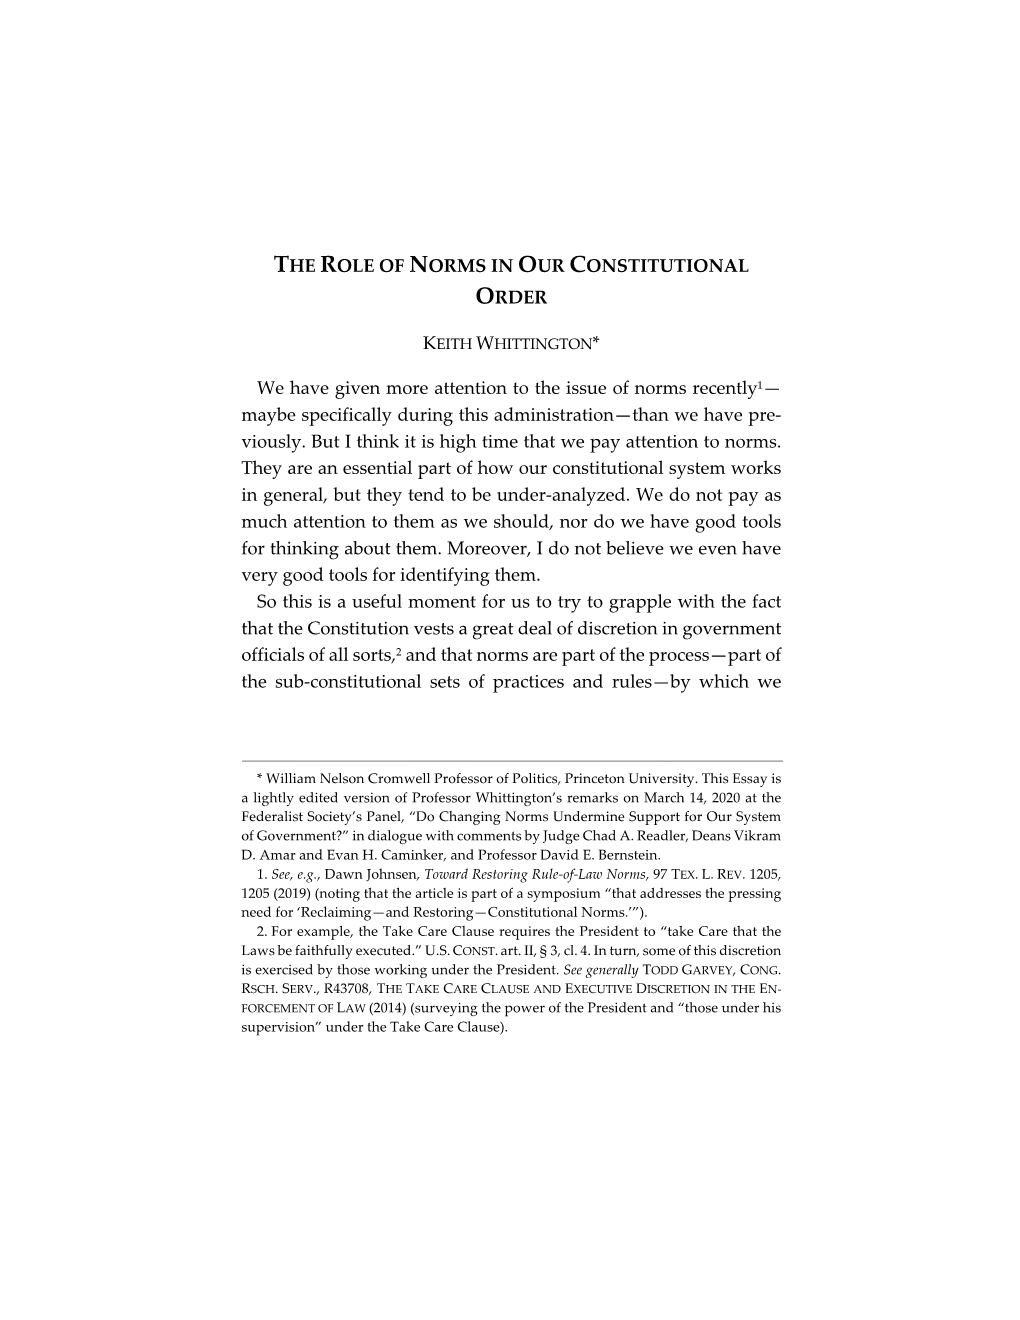 The Role of Norms in Our Constitutional Order